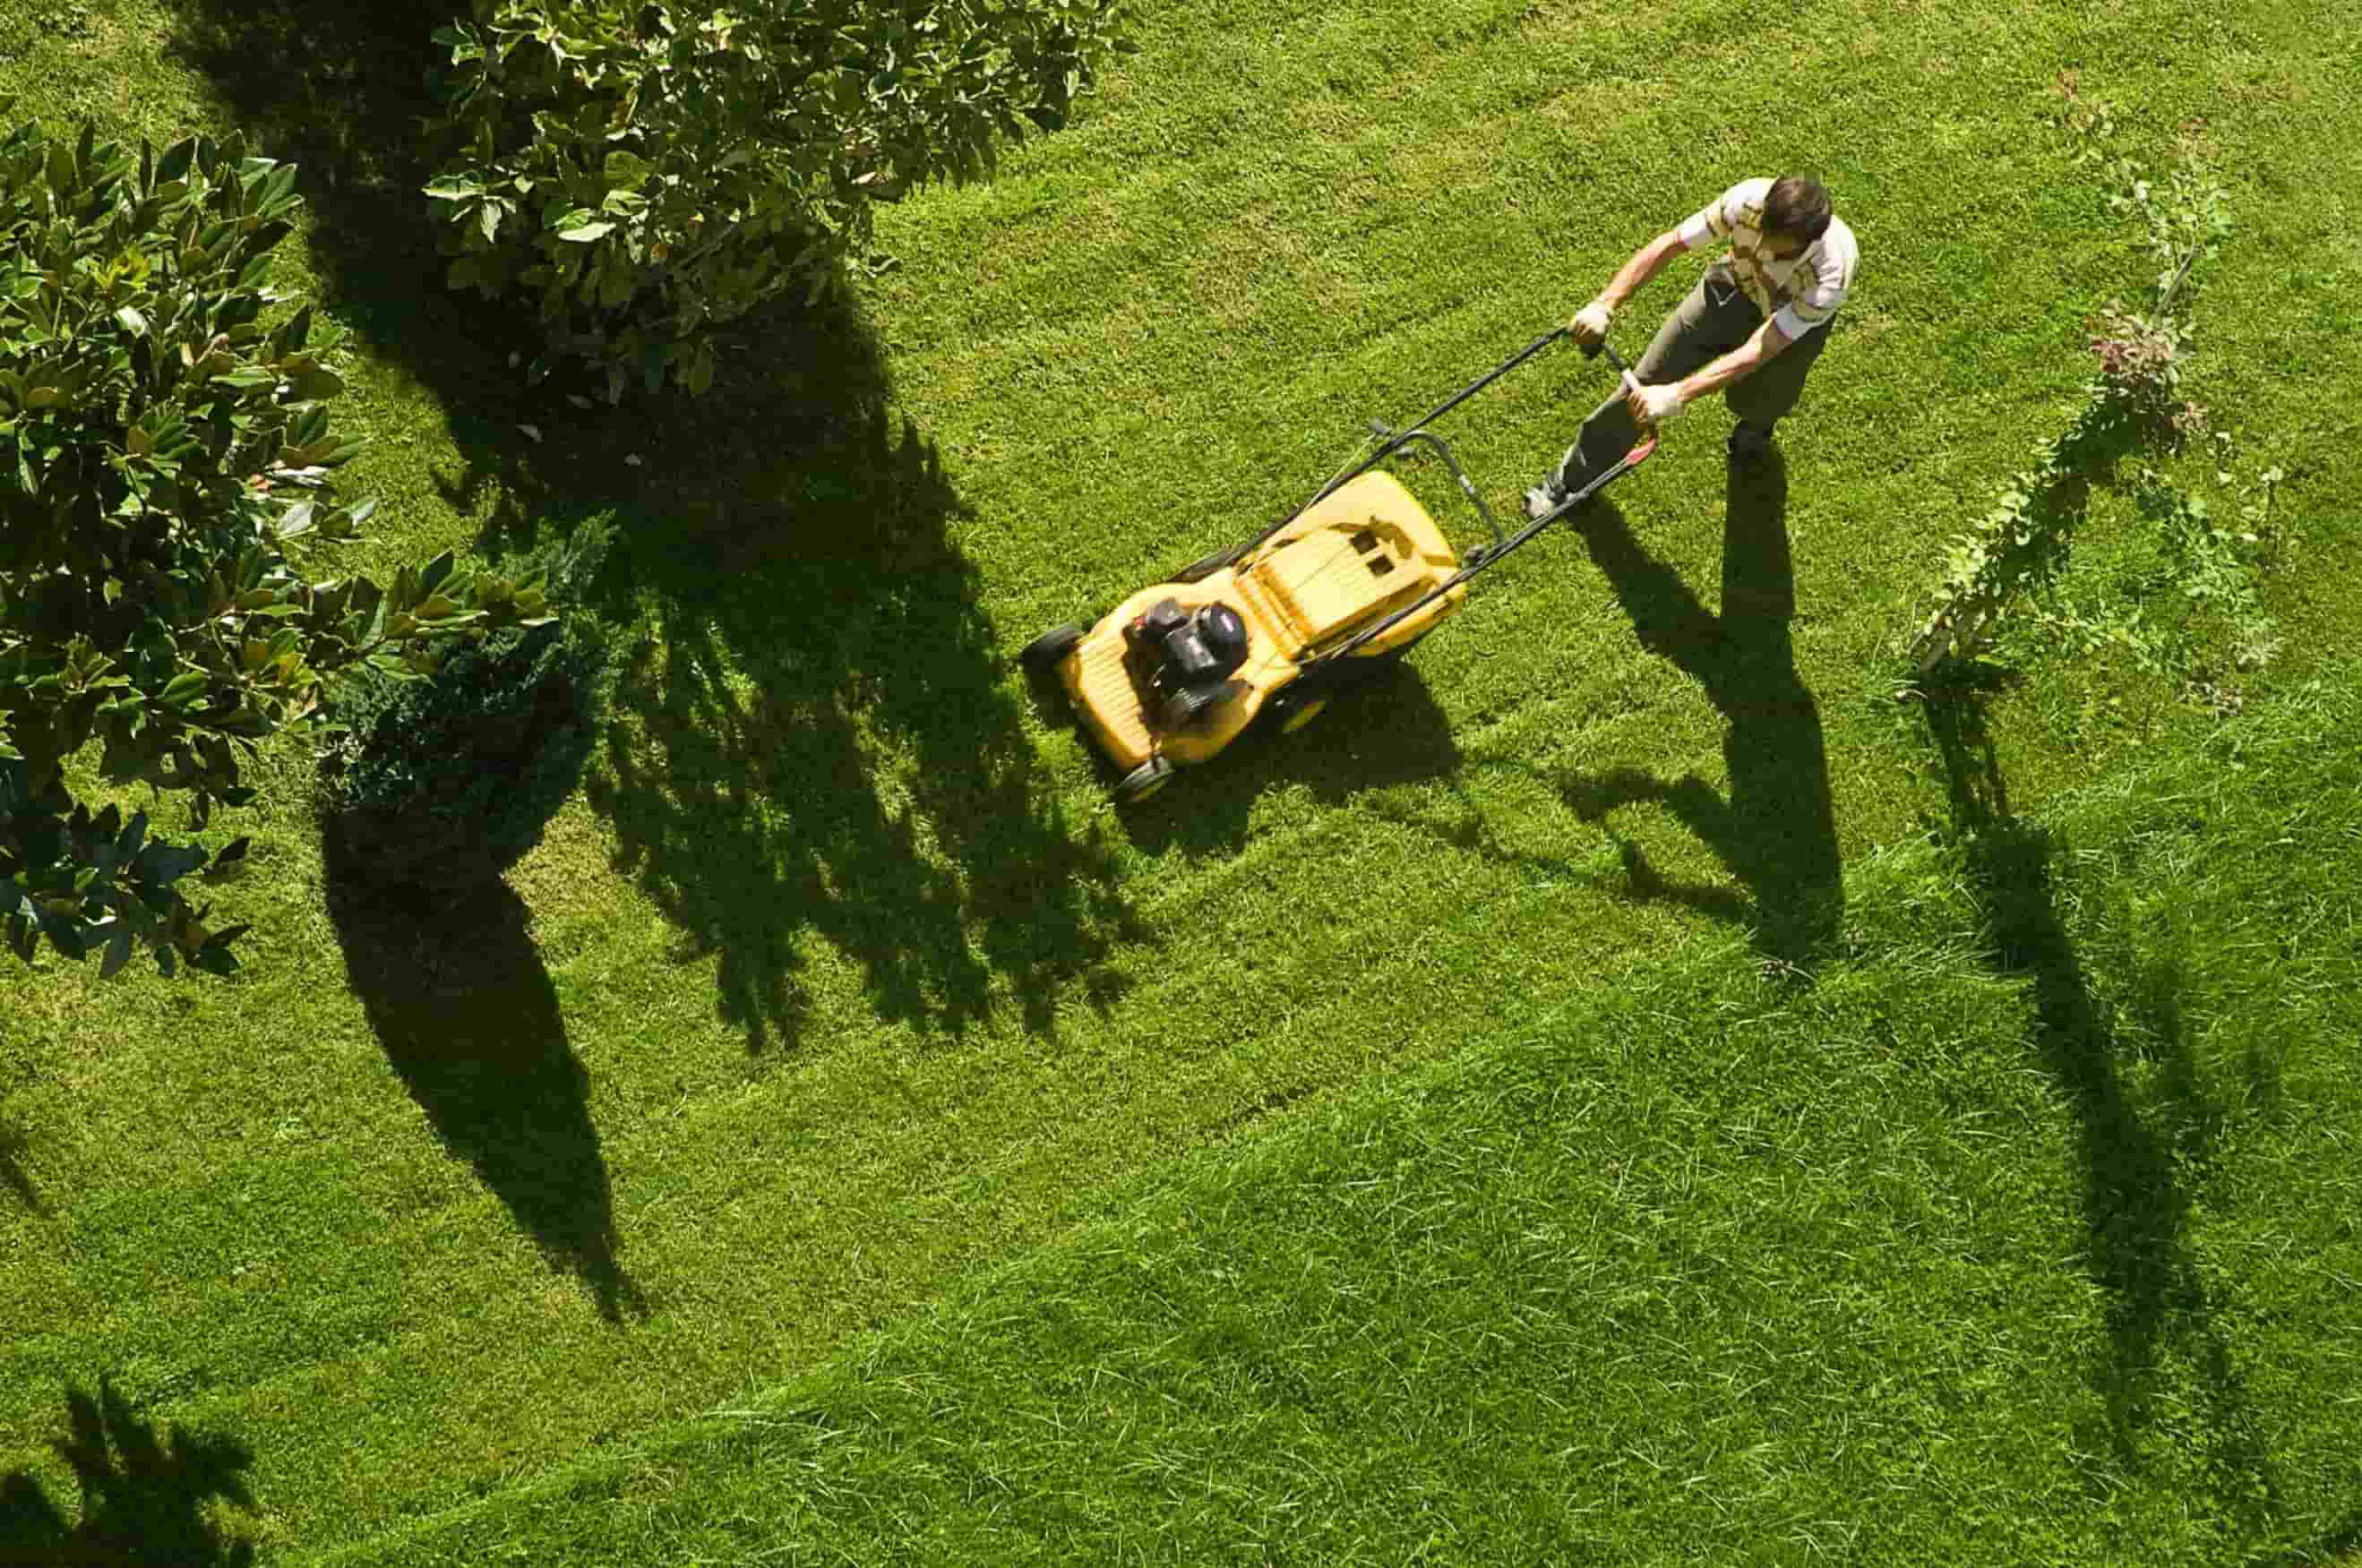 How To Pick Up Grass After Mowing